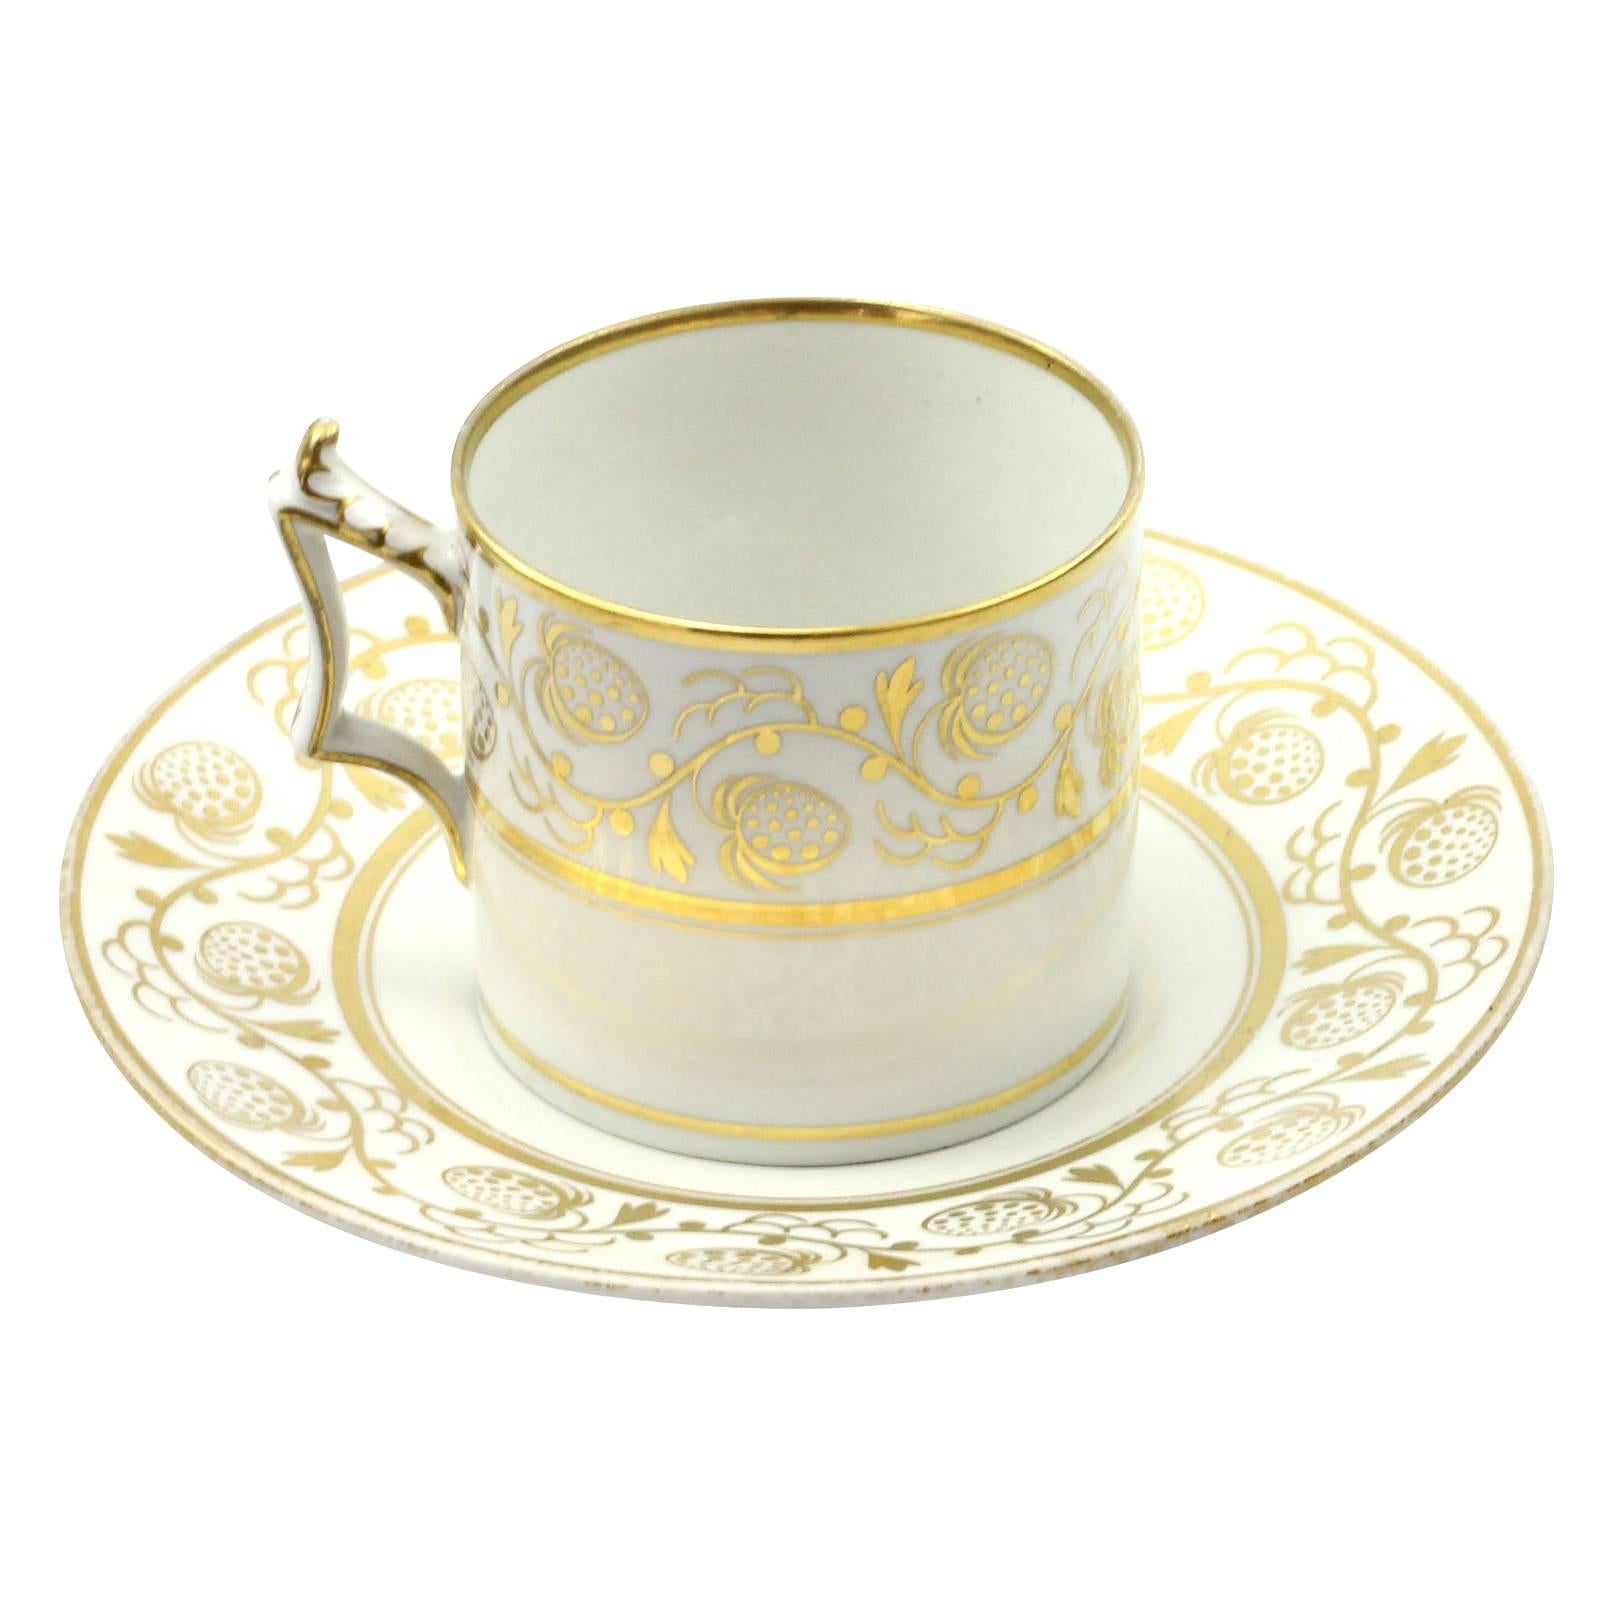 Early 19th Century Porcelain Coffee Cup by Flight Barr and Barr